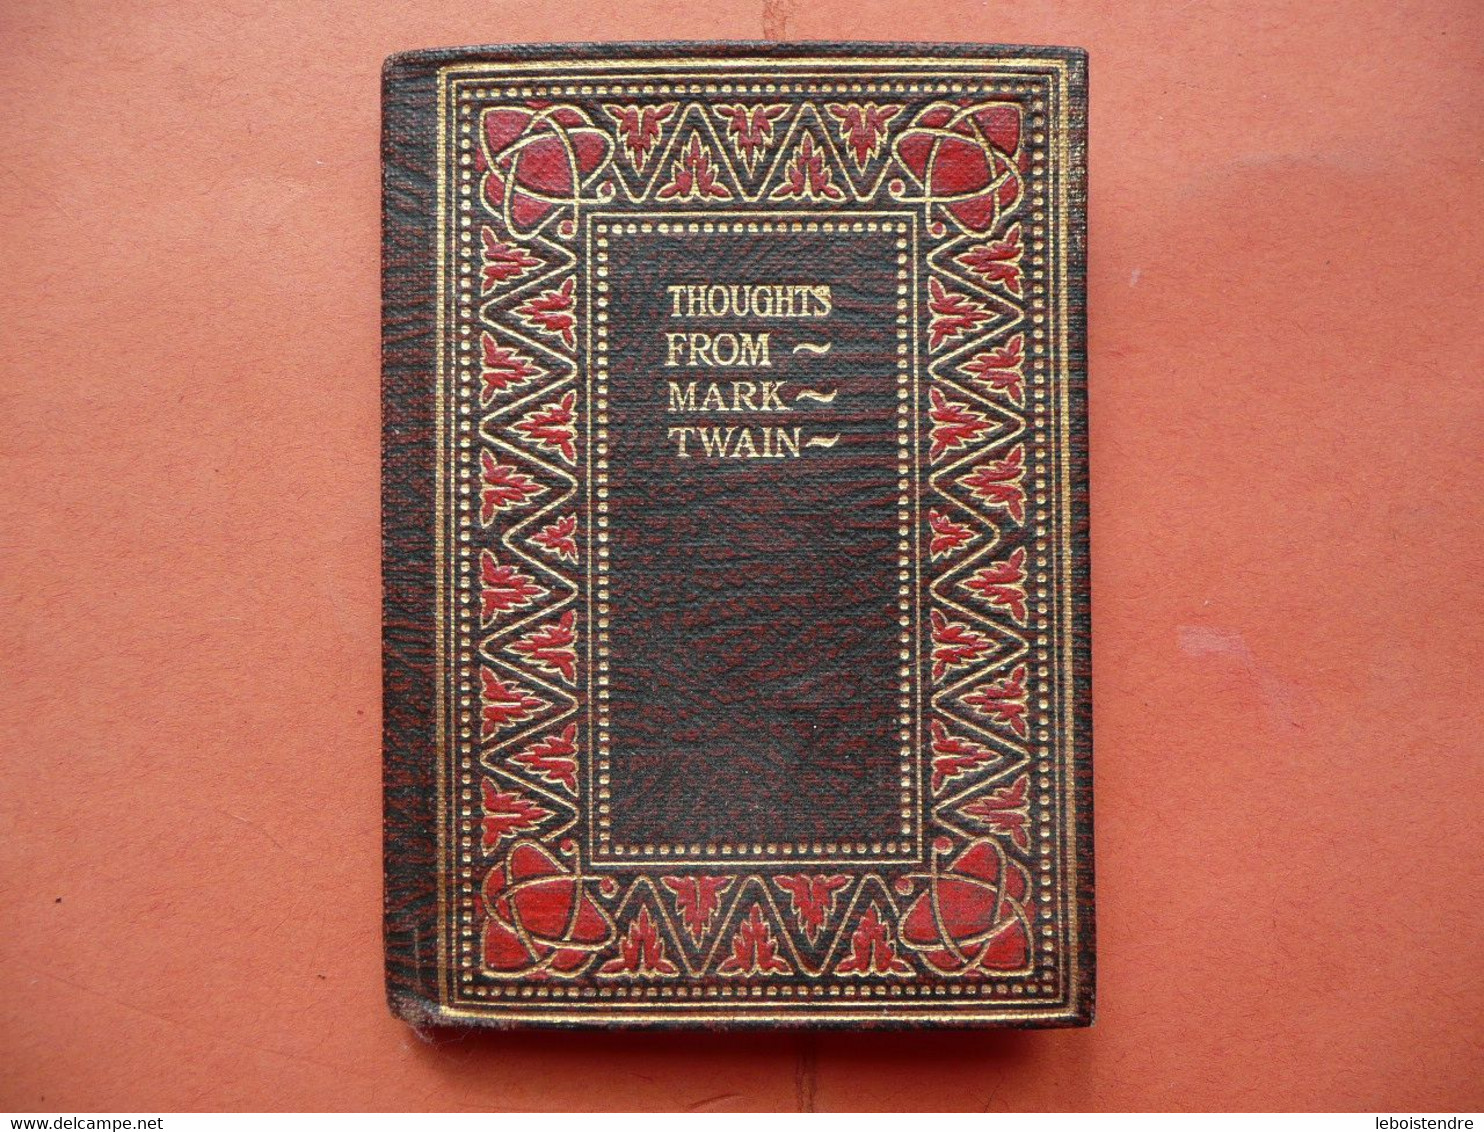 THOUGHTS FROM MARK TWAIN SELECTED BY ELSIE E. MORTON SESAME BOOKLETS MINIATURE - Literatuur